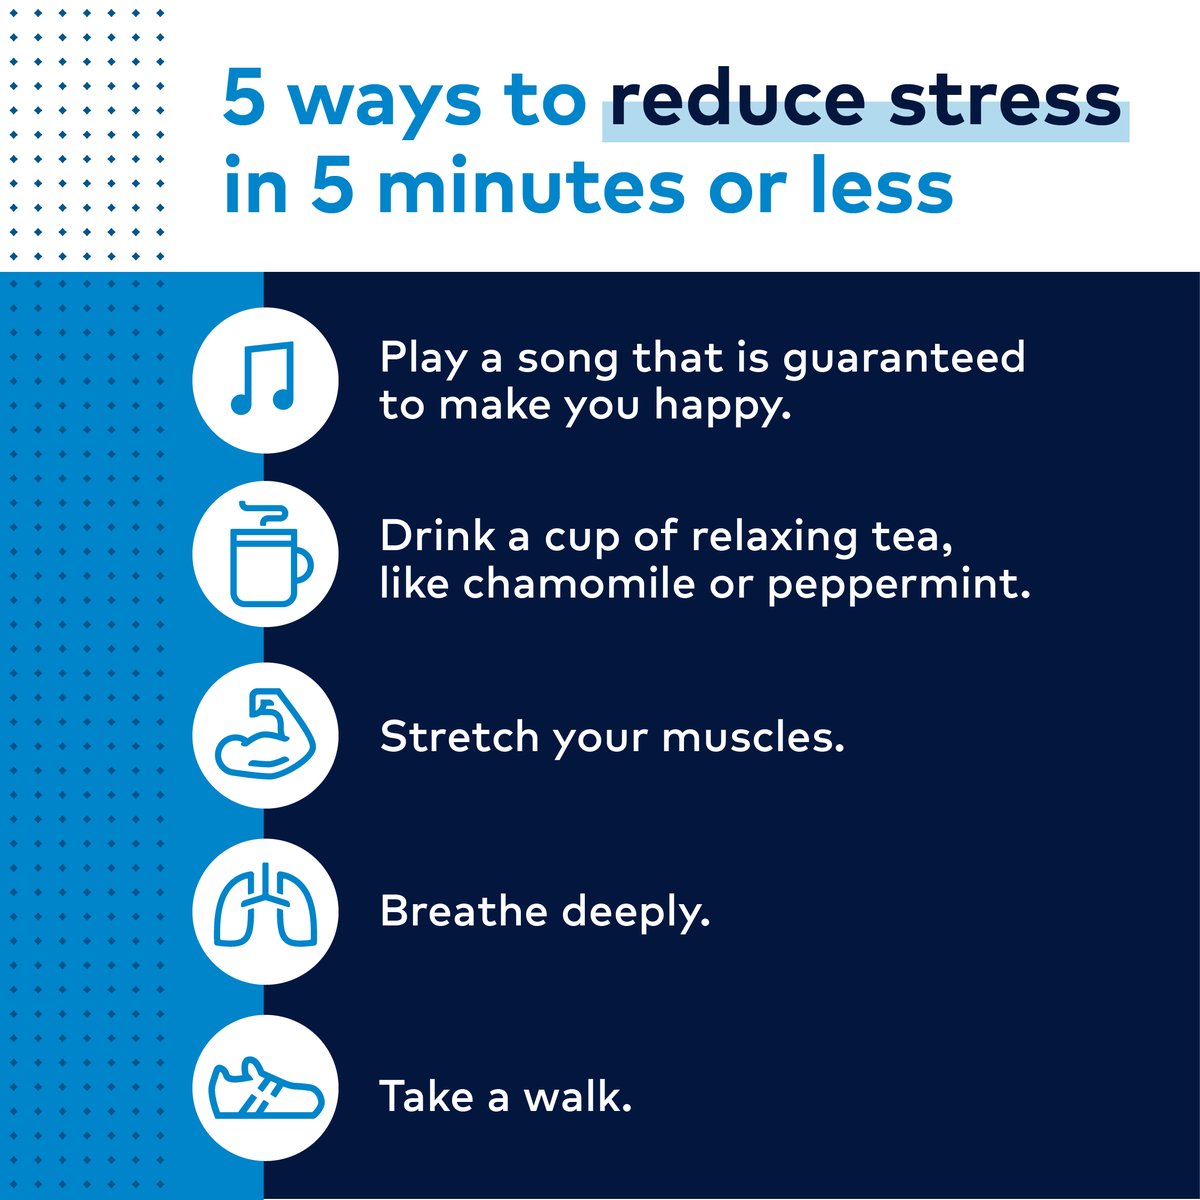 There’s plenty you can do to reduce stress in your life, but some techniques take longer than others. When there isn’t time for a 30-minute workout or phone call with a loved one, you can de-stress in five minutes or less. #HealthierTomorrows #StressRelief